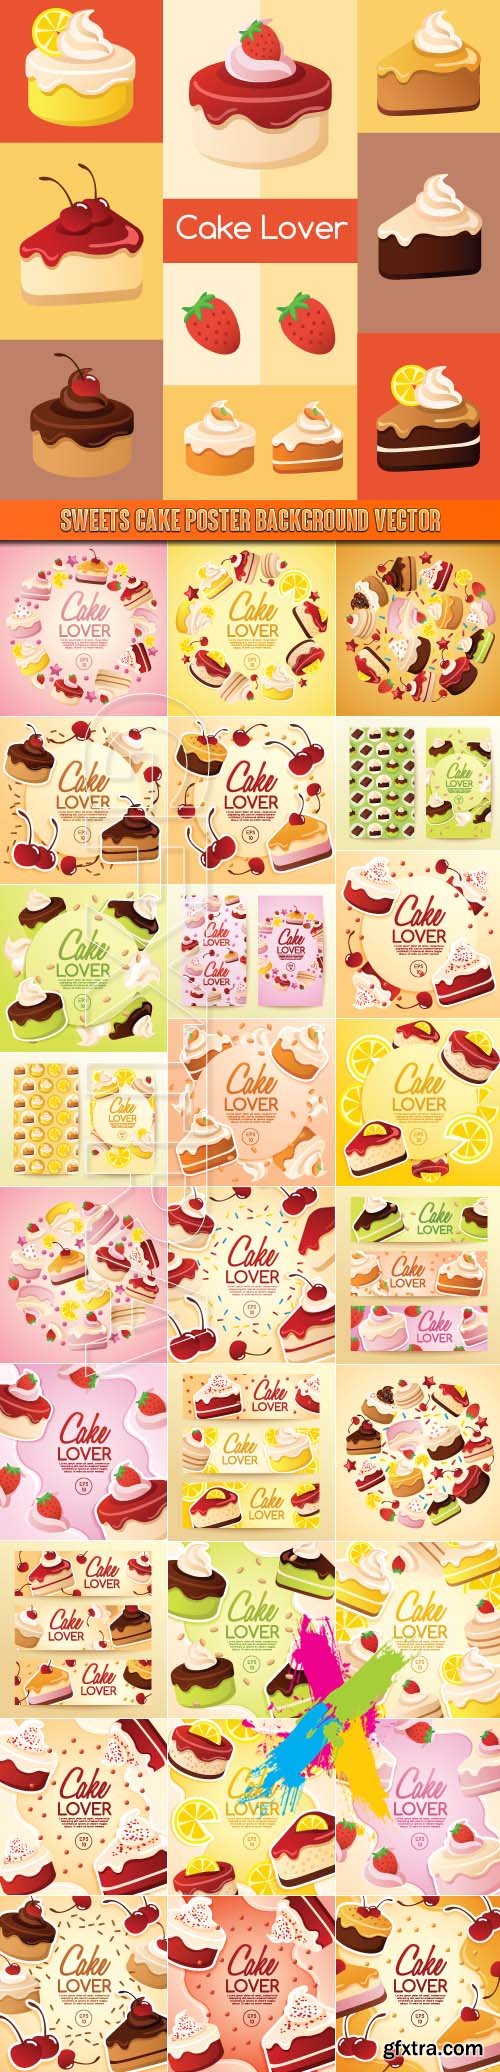 Sweets cake poster background vector